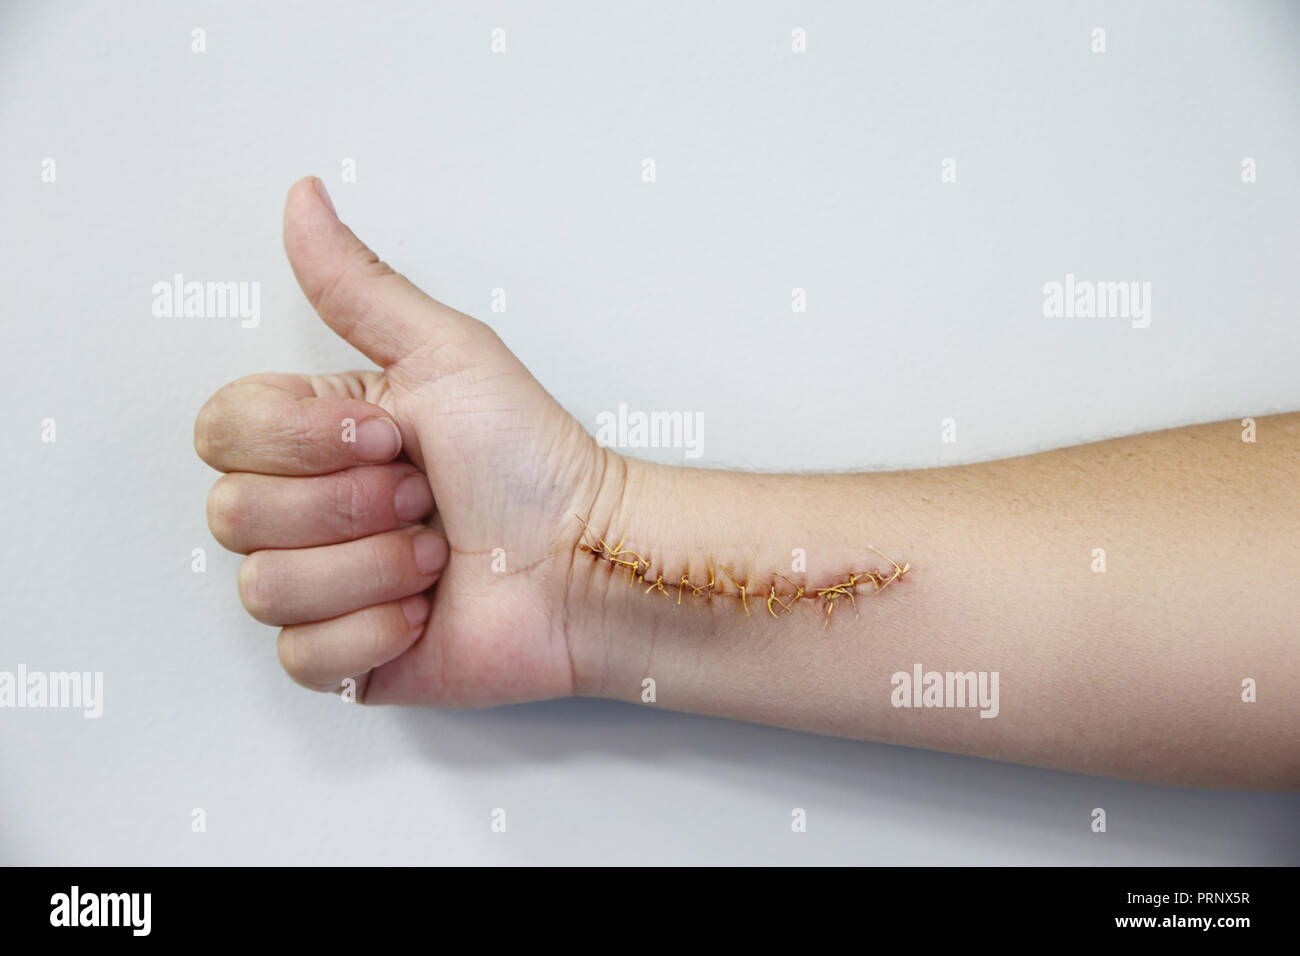 Humand hand hurt with a big scar with a lot of stitches. Horizontal shot Stock Photo